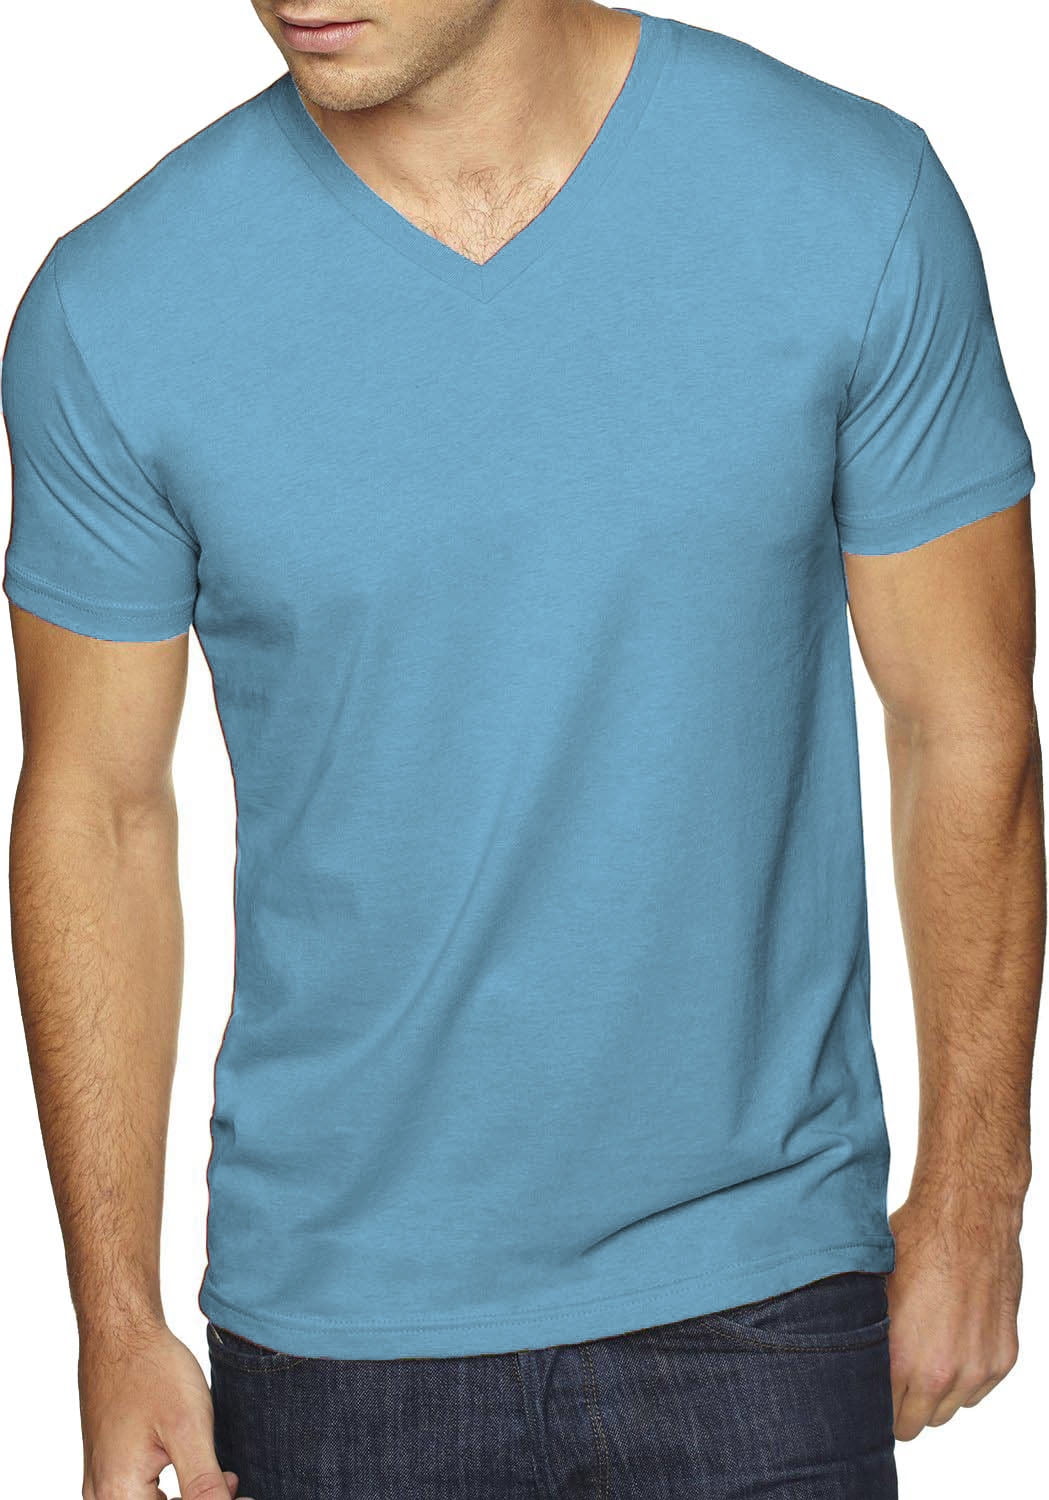 Hat and Beyond Mens V Neck Tee Solid Fit Premium T Shirts S-2XL 